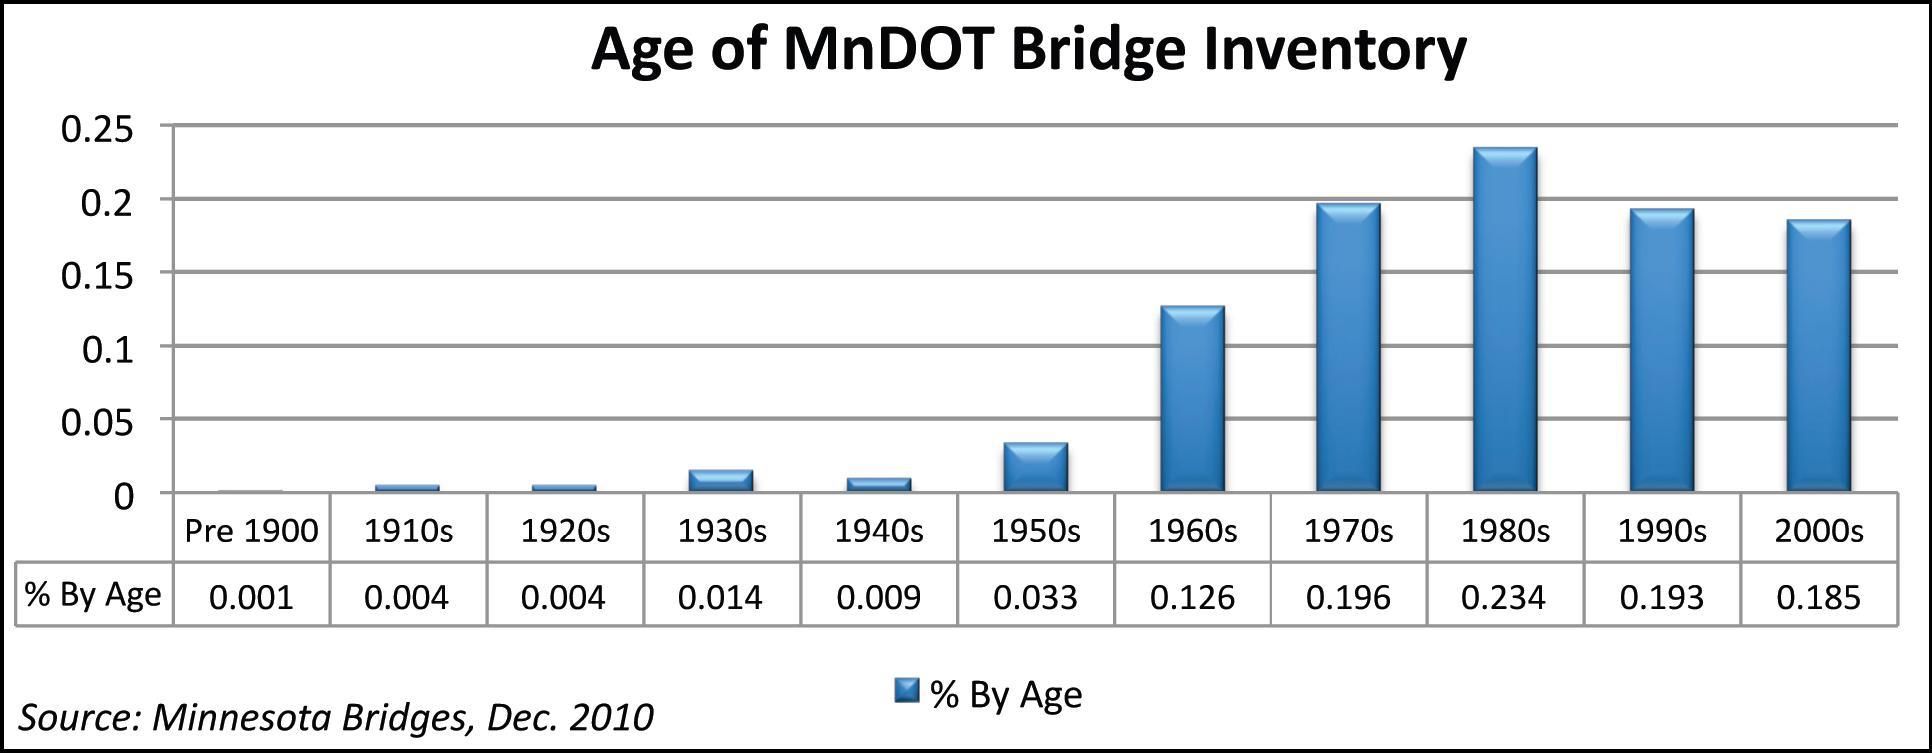 Figure 45 illustrates the number of bridges in Minnesota by the decade in which they were built. It shows that more than 20 percent of the bridges were built in the decade of the 1980s, nearly 20 percent were built in the 1970s, more than 10 percent were built in the 1960s.